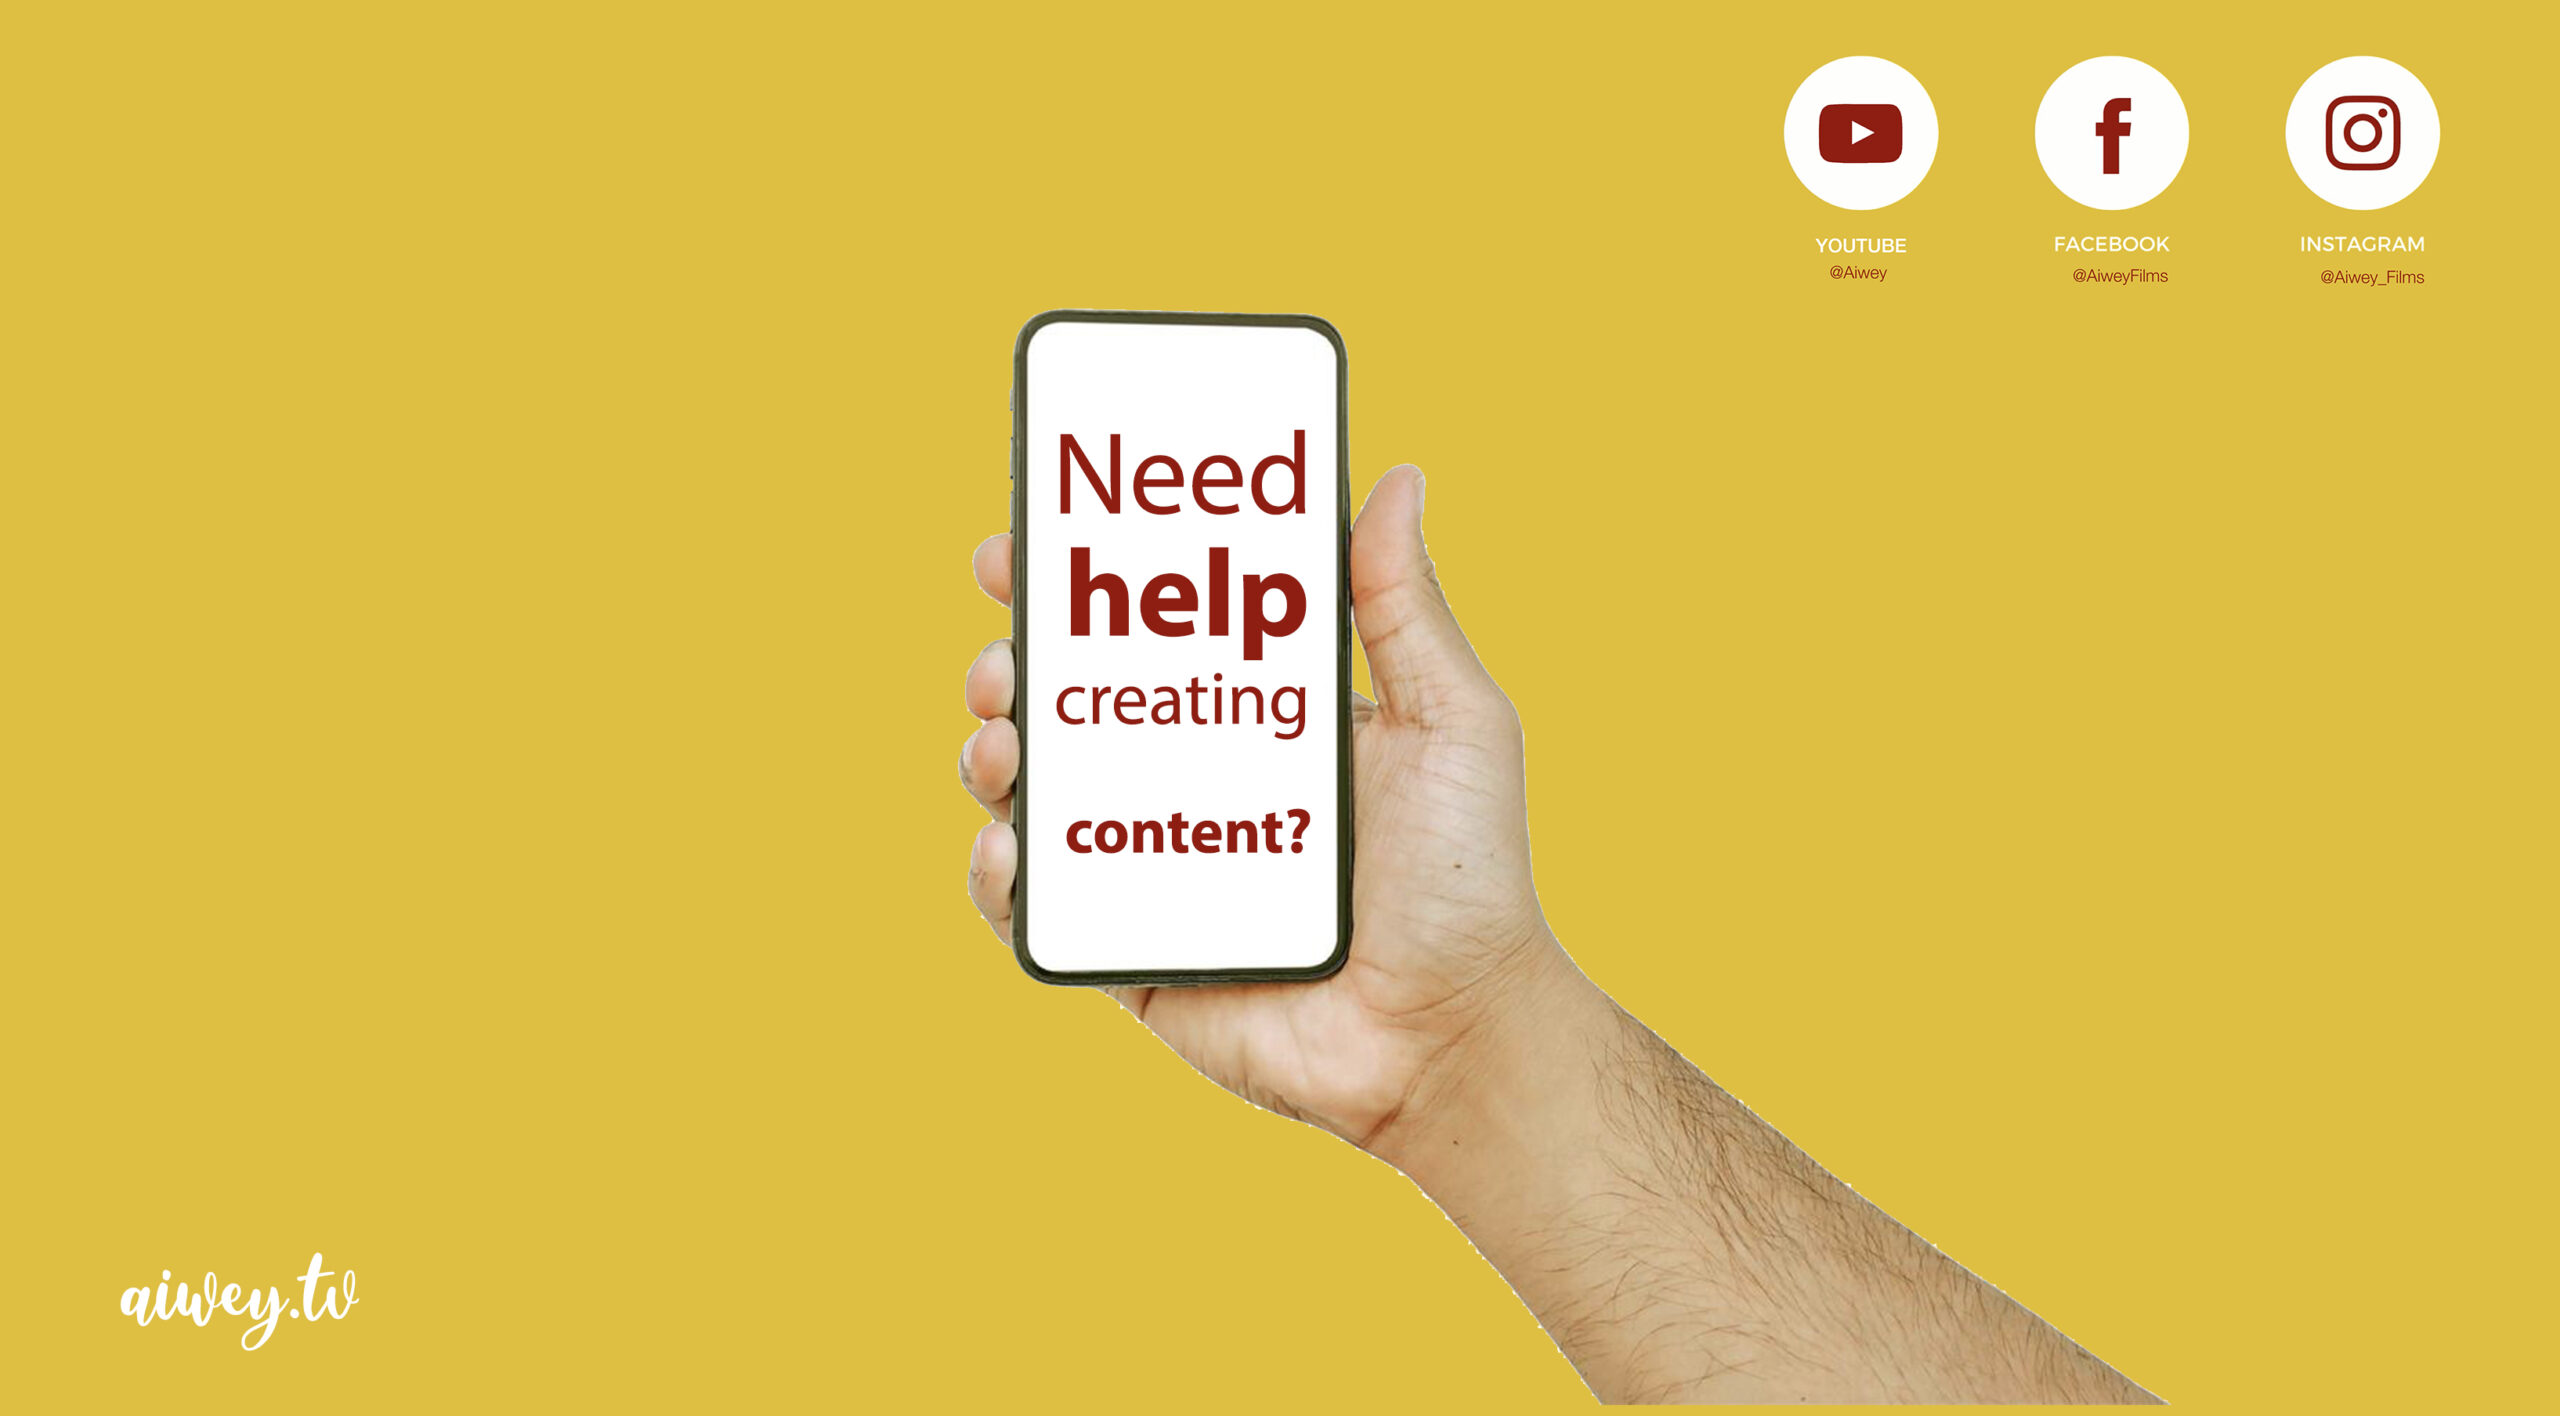 NEED HELP CREATING CONTENT?